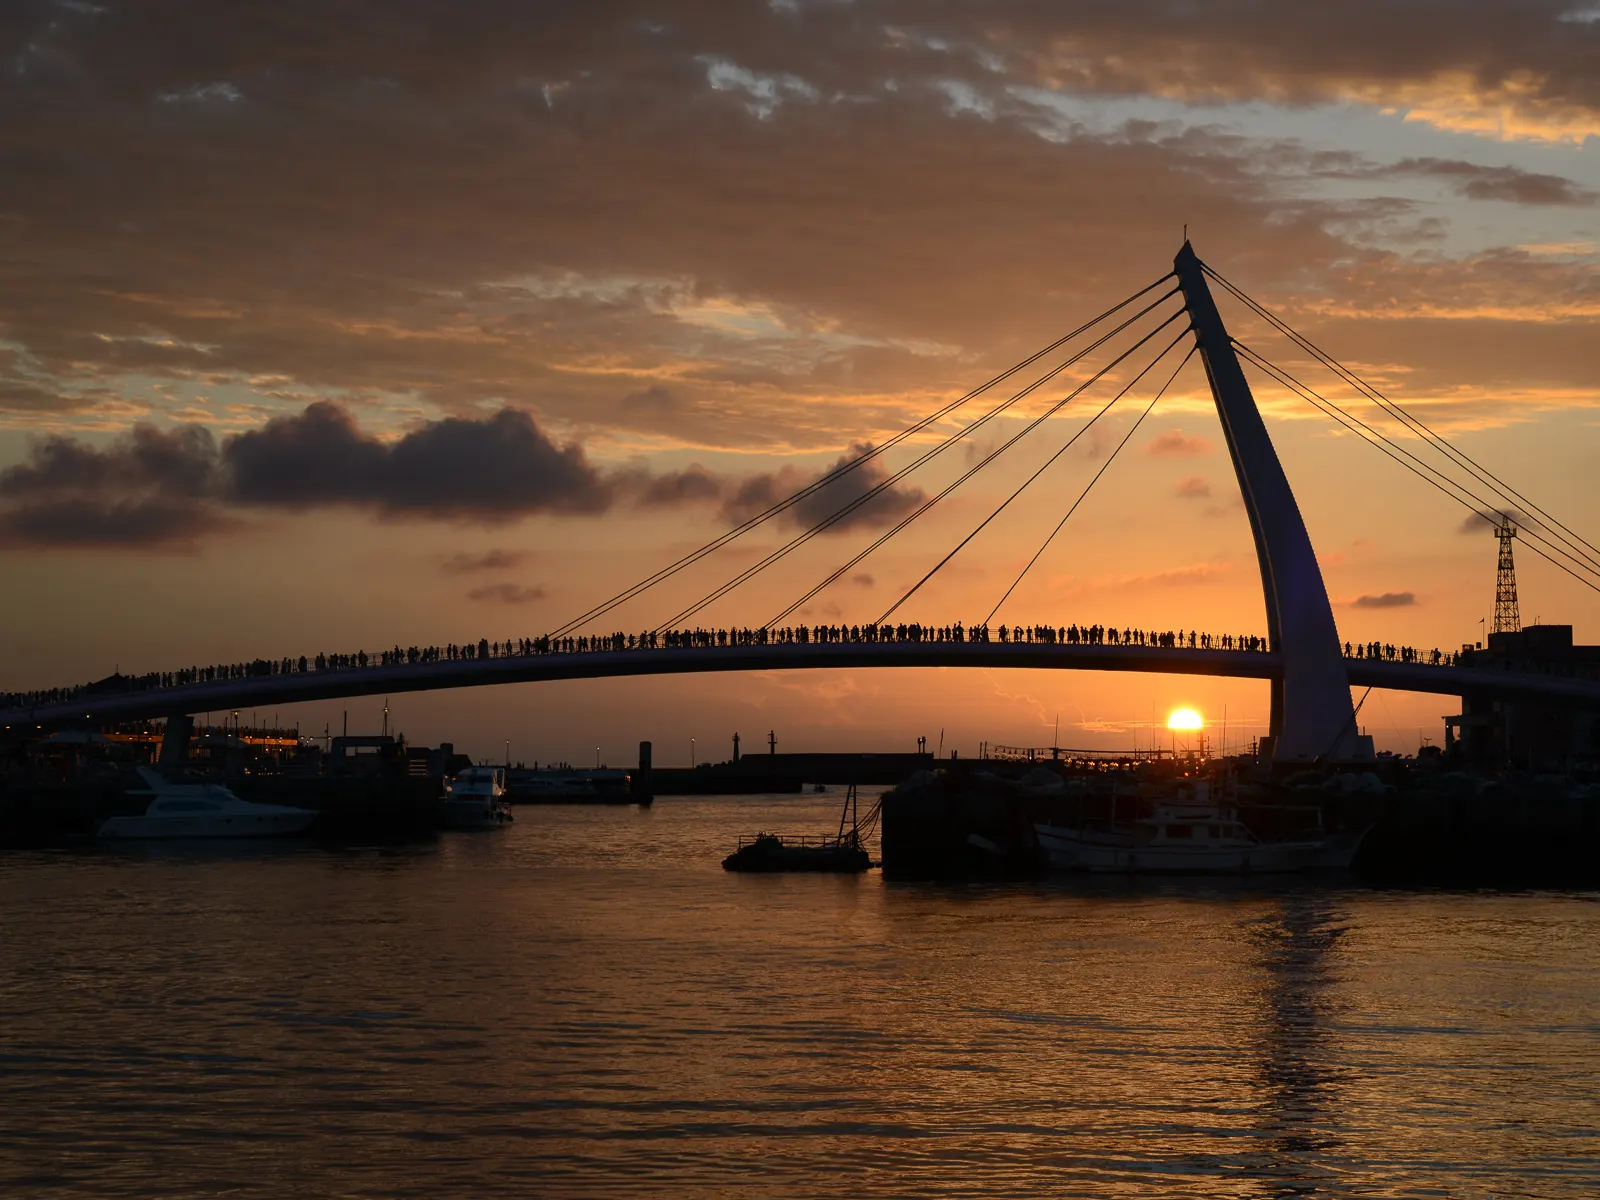 The sun sets with Lover's Bridge in the foreground.